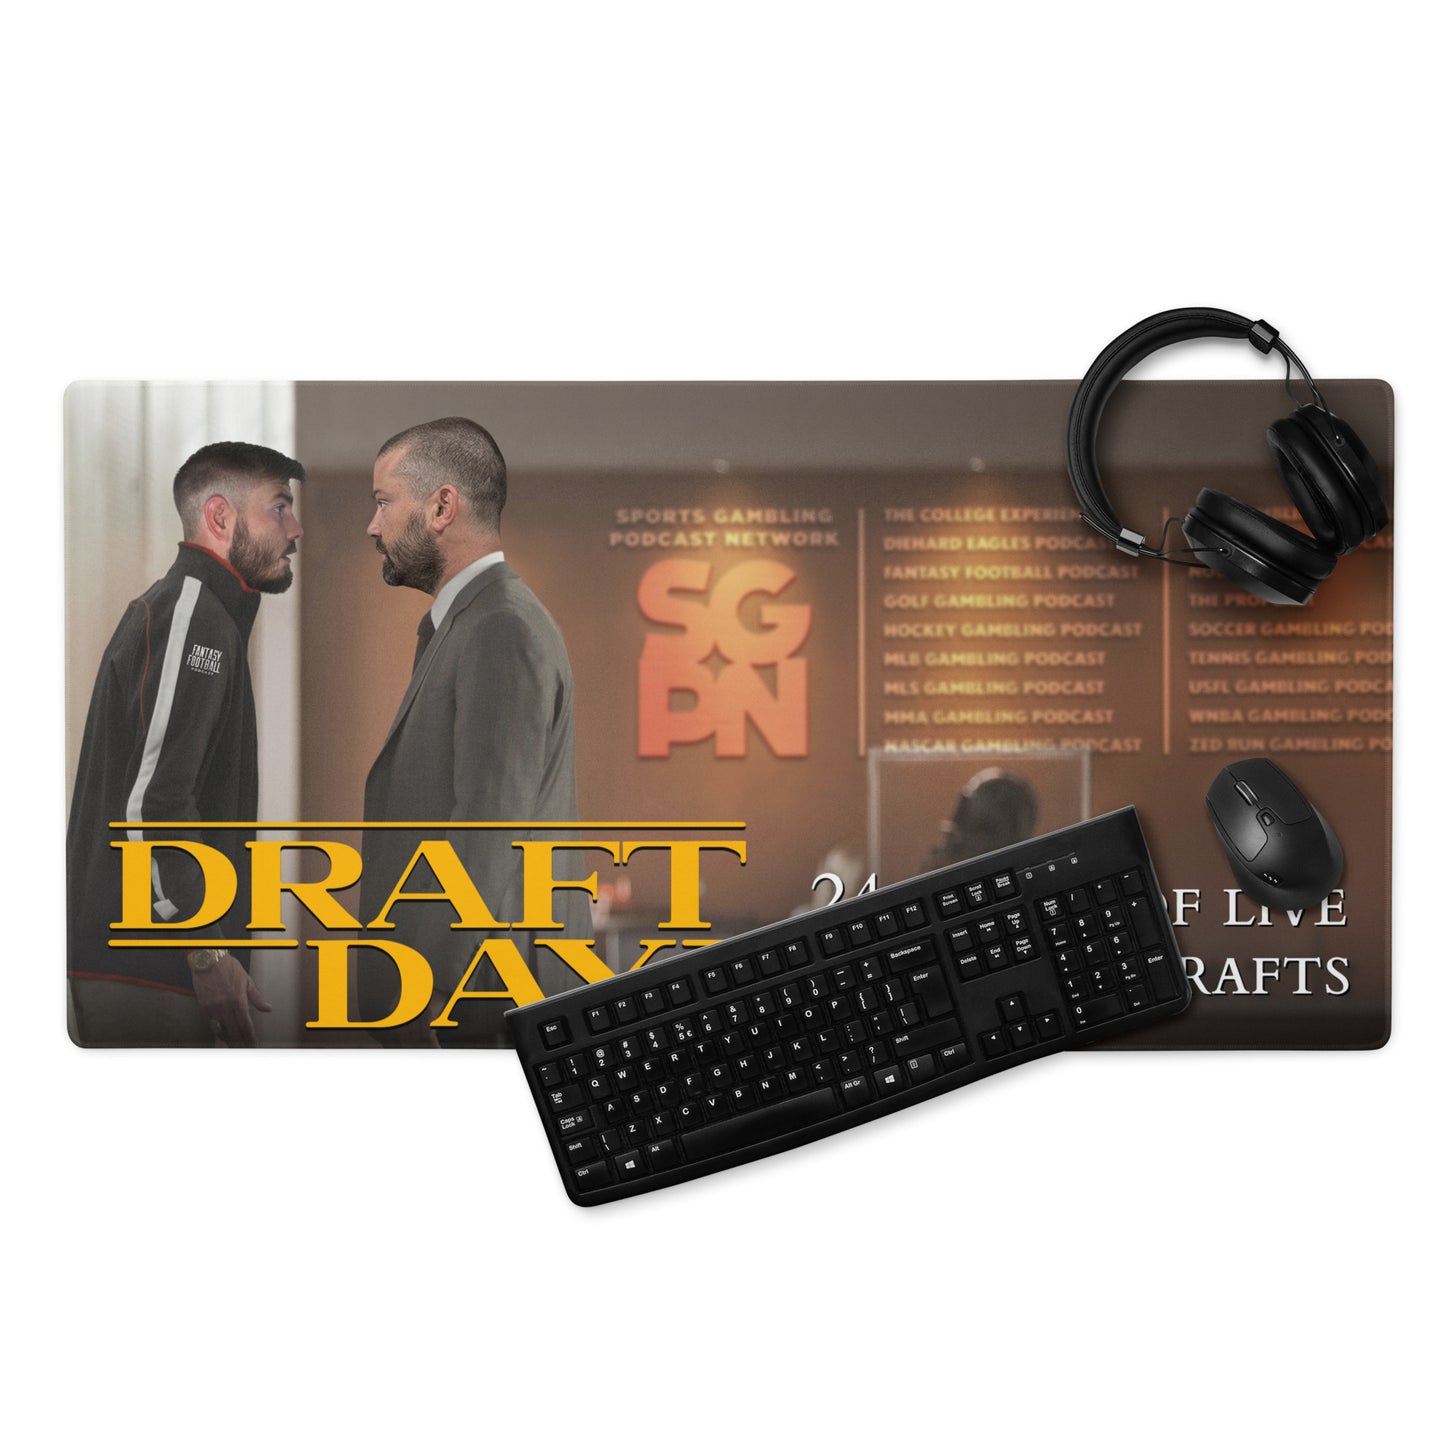 Draft Day 3: 24 Hours of Live Best Ball Drafts - Gaming mouse pad 36″ × 18″